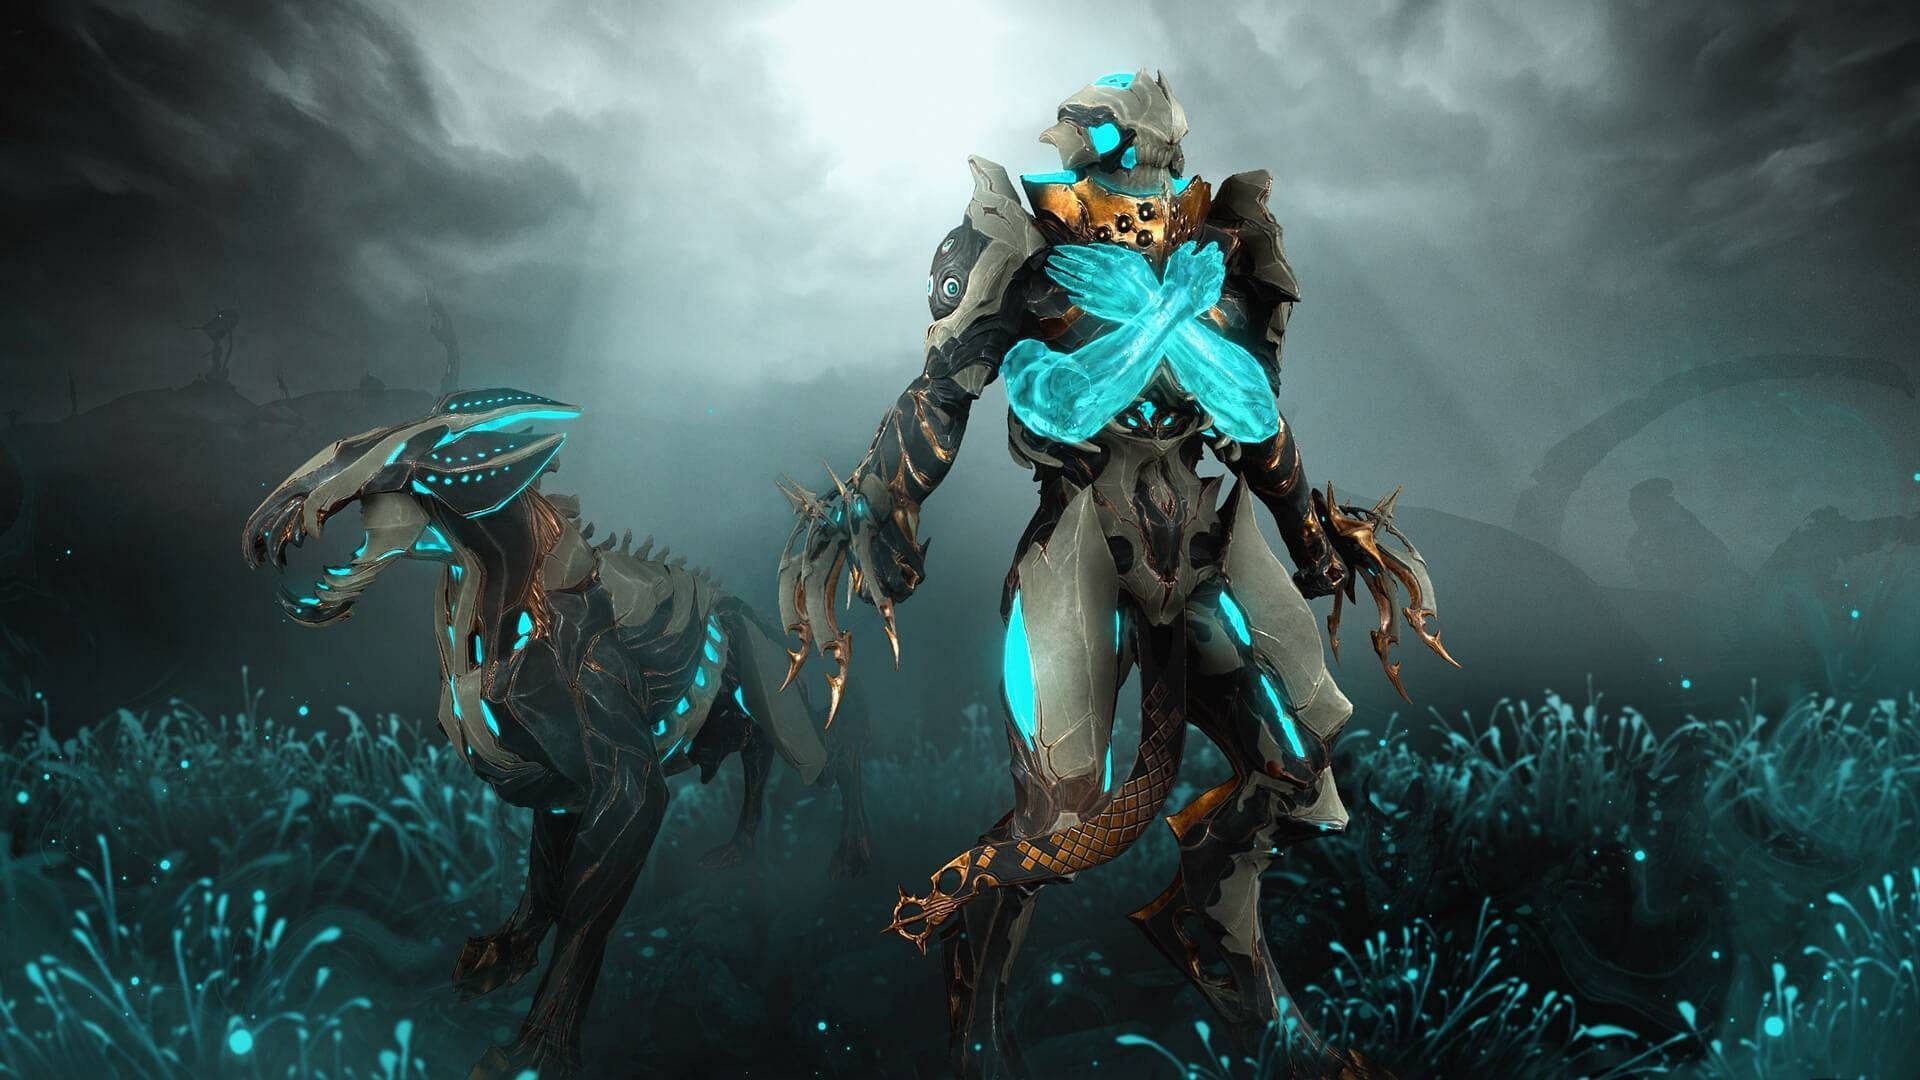 Nidus once used to be a top-tier frame but gradually got replaced by other alternatives (Image via Digital Extremes)